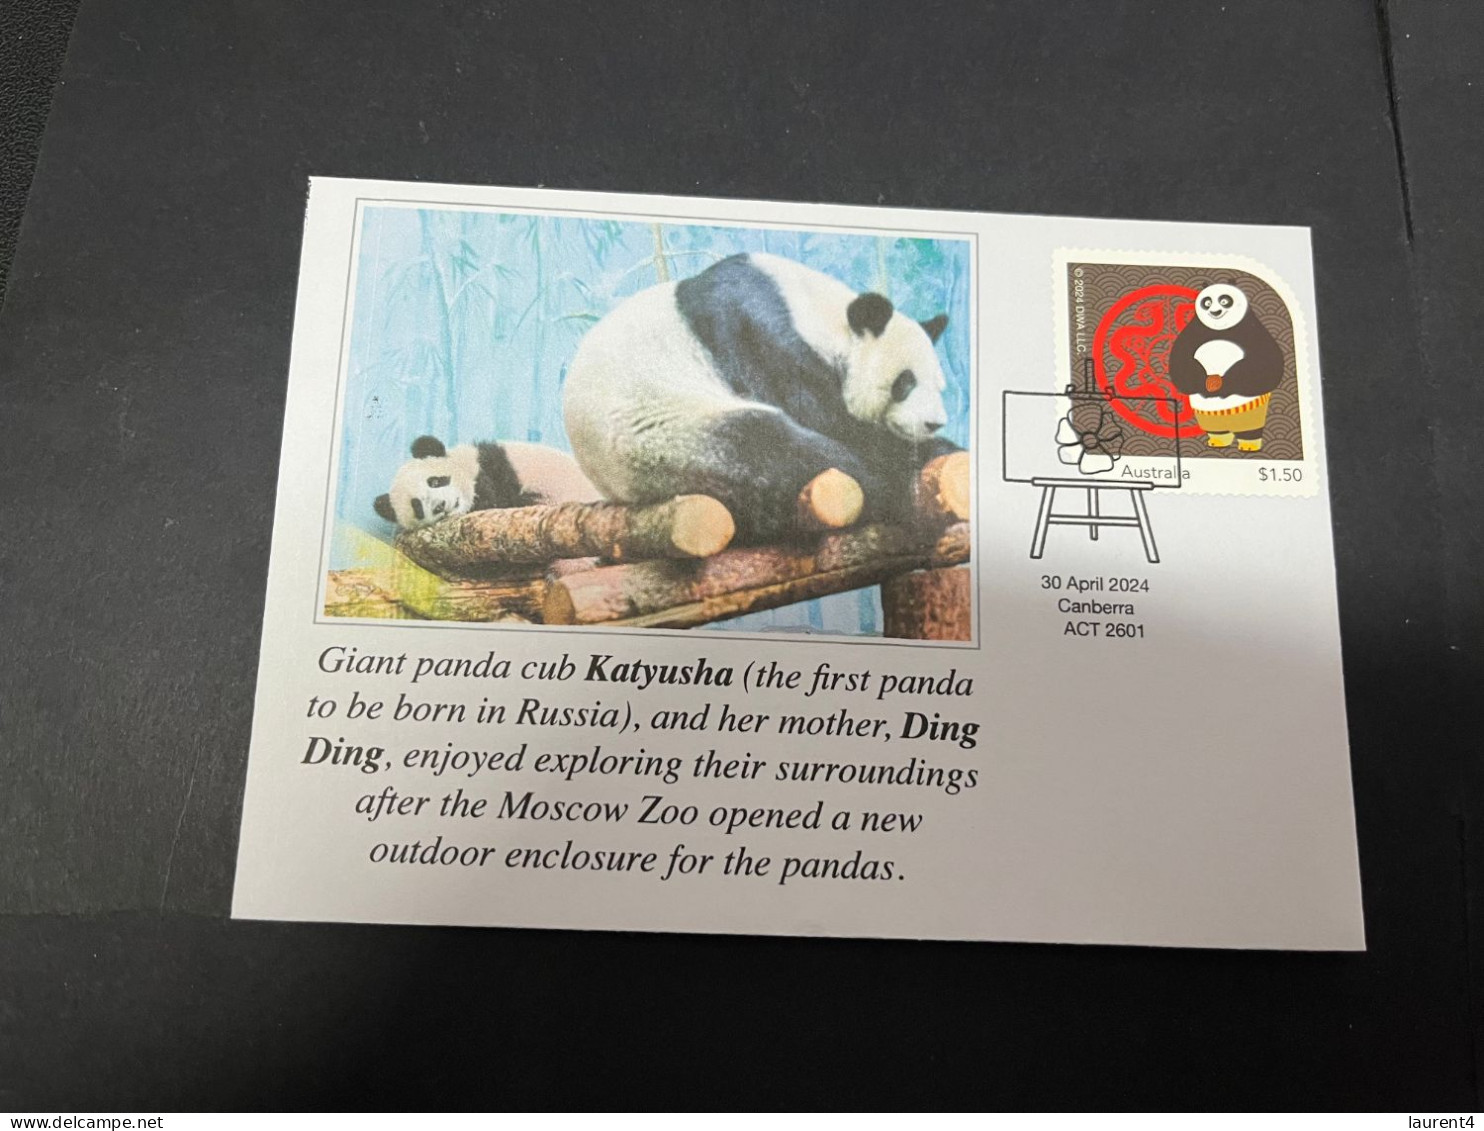 10-5-2024 (4 Z 37) Russia - Giant Panda (for Katyusha & Ding Ding) Outdoor Enclosure Open At Moscow Zoo (with Kung Fu) - Bears